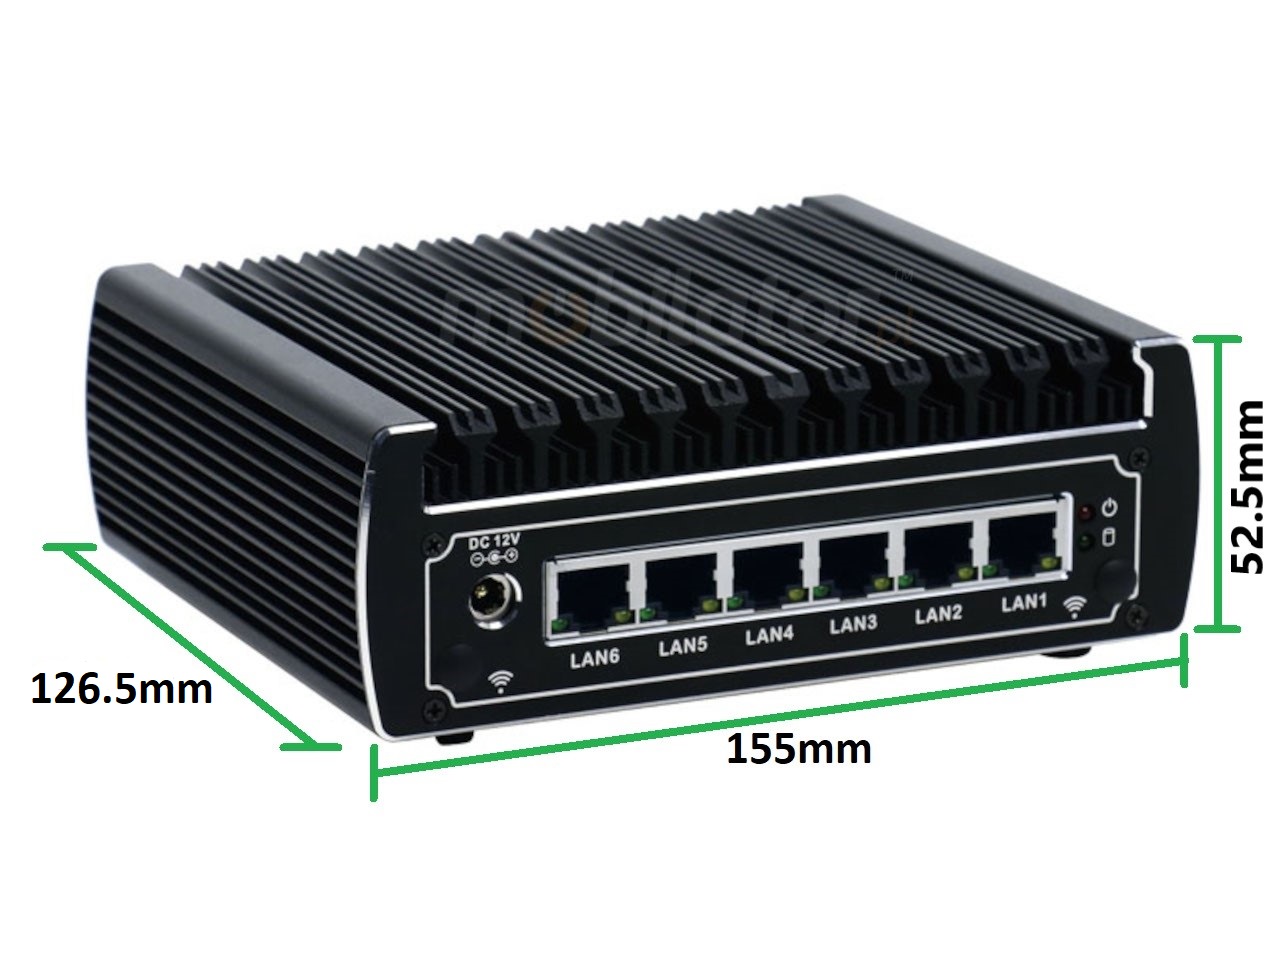  IBOX N133  v.14, size, industrial small fast reliable fanless industrial small LAN INTEL i3 HDD DDR4 WIFI BLUETOOTH